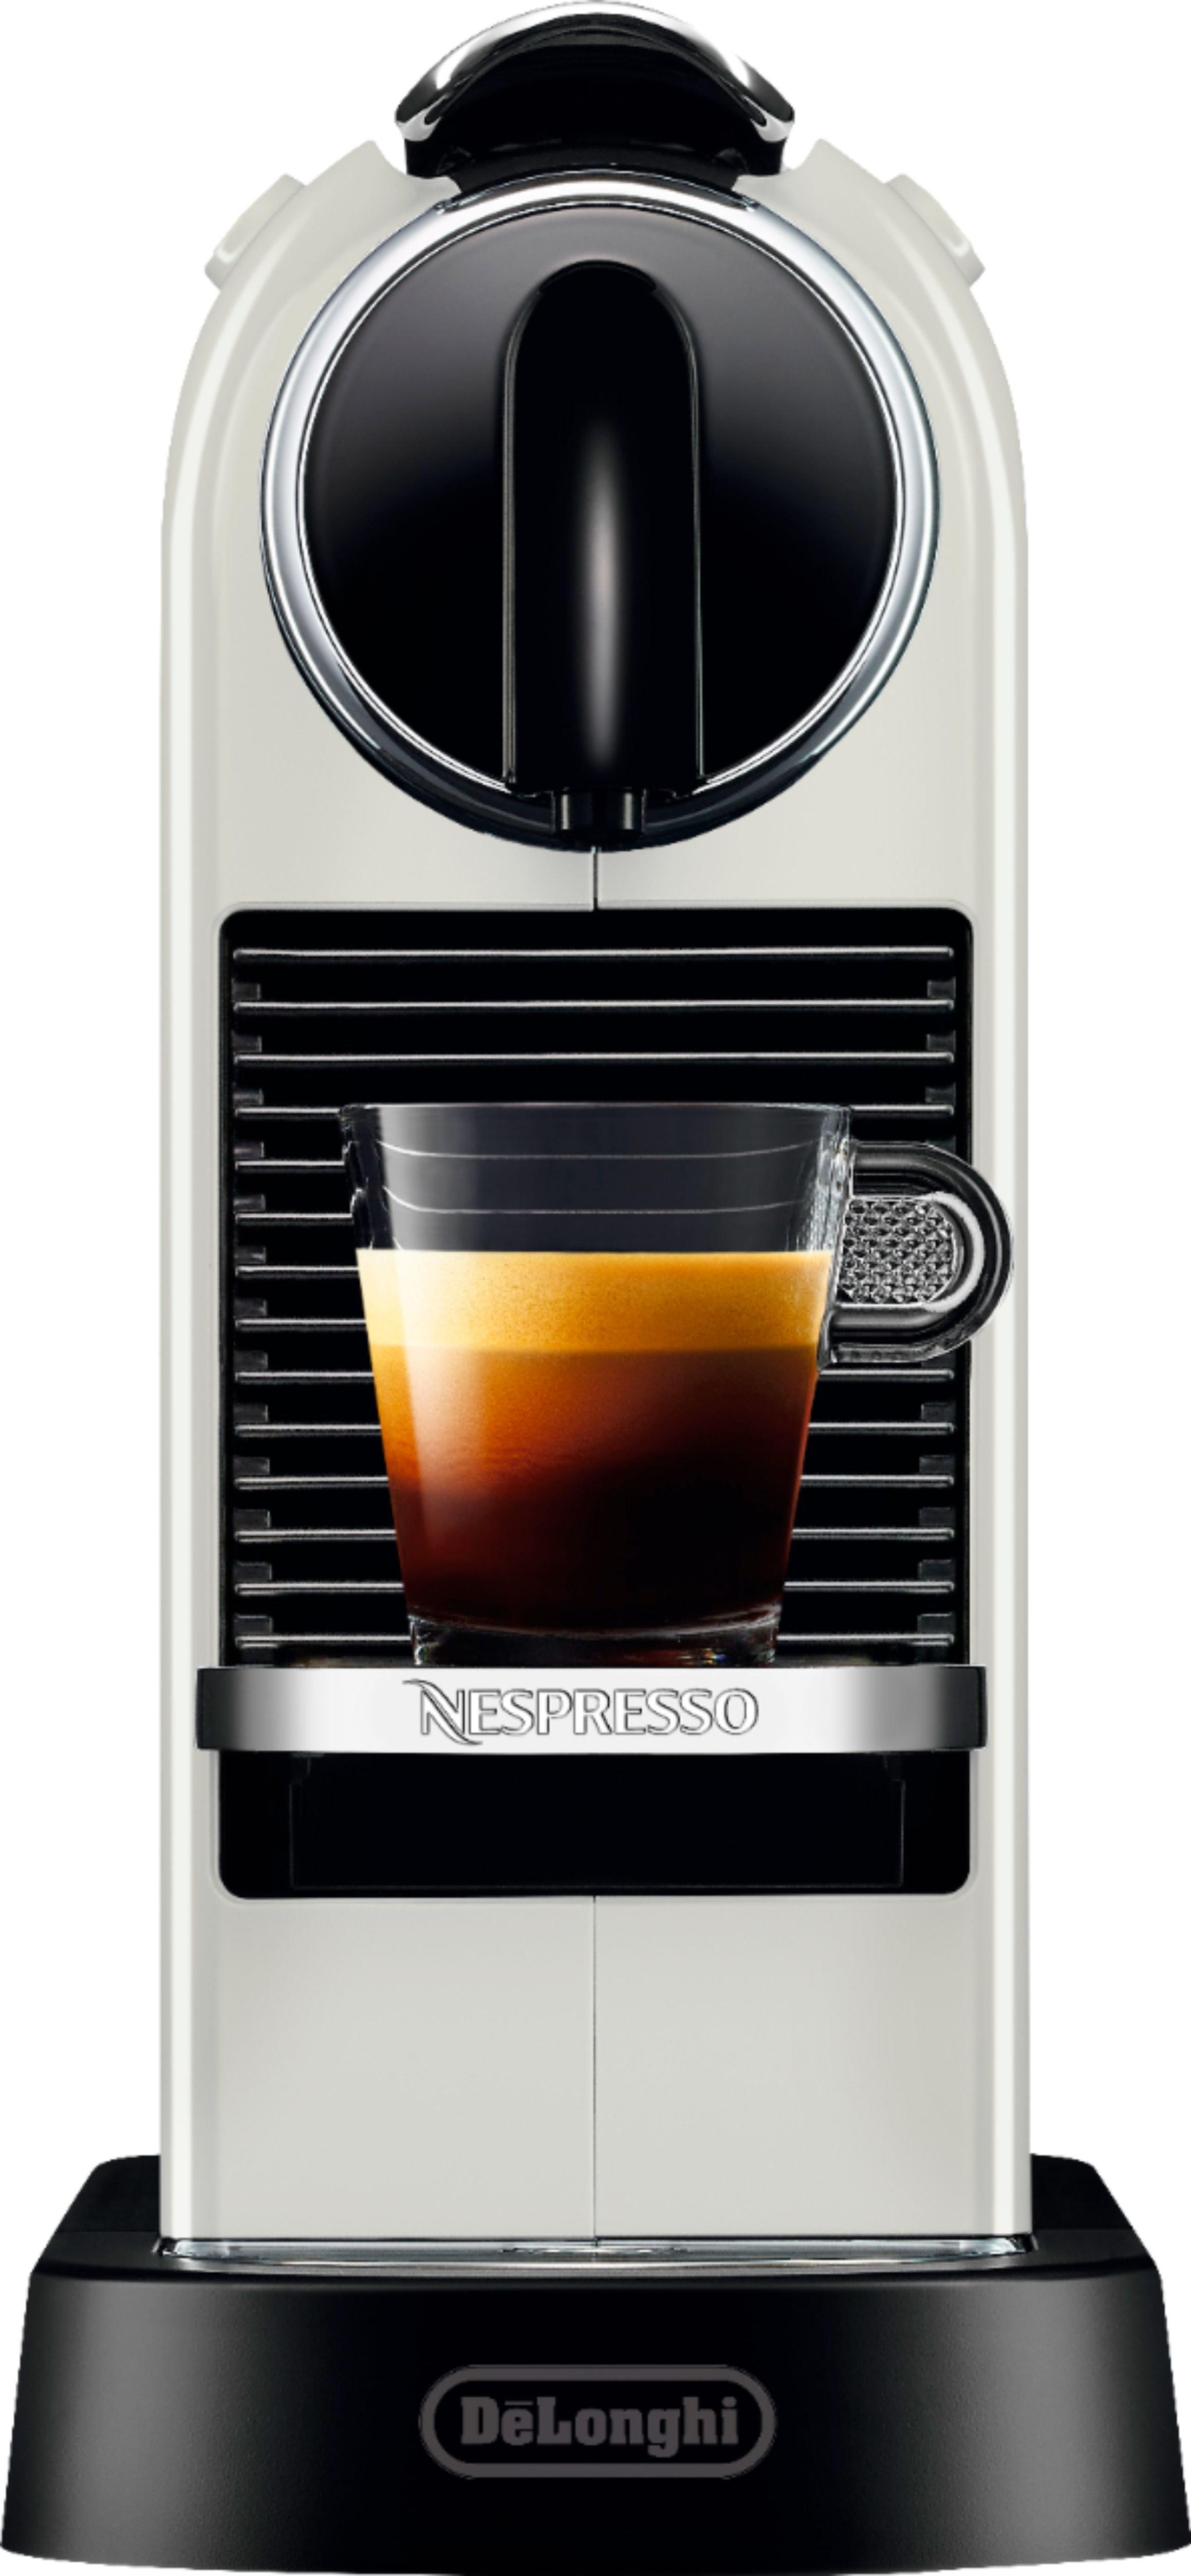 Rent to Own Nespresso Nespresso Professional Coffee Maker Starter Bundle at  Aaron's today!